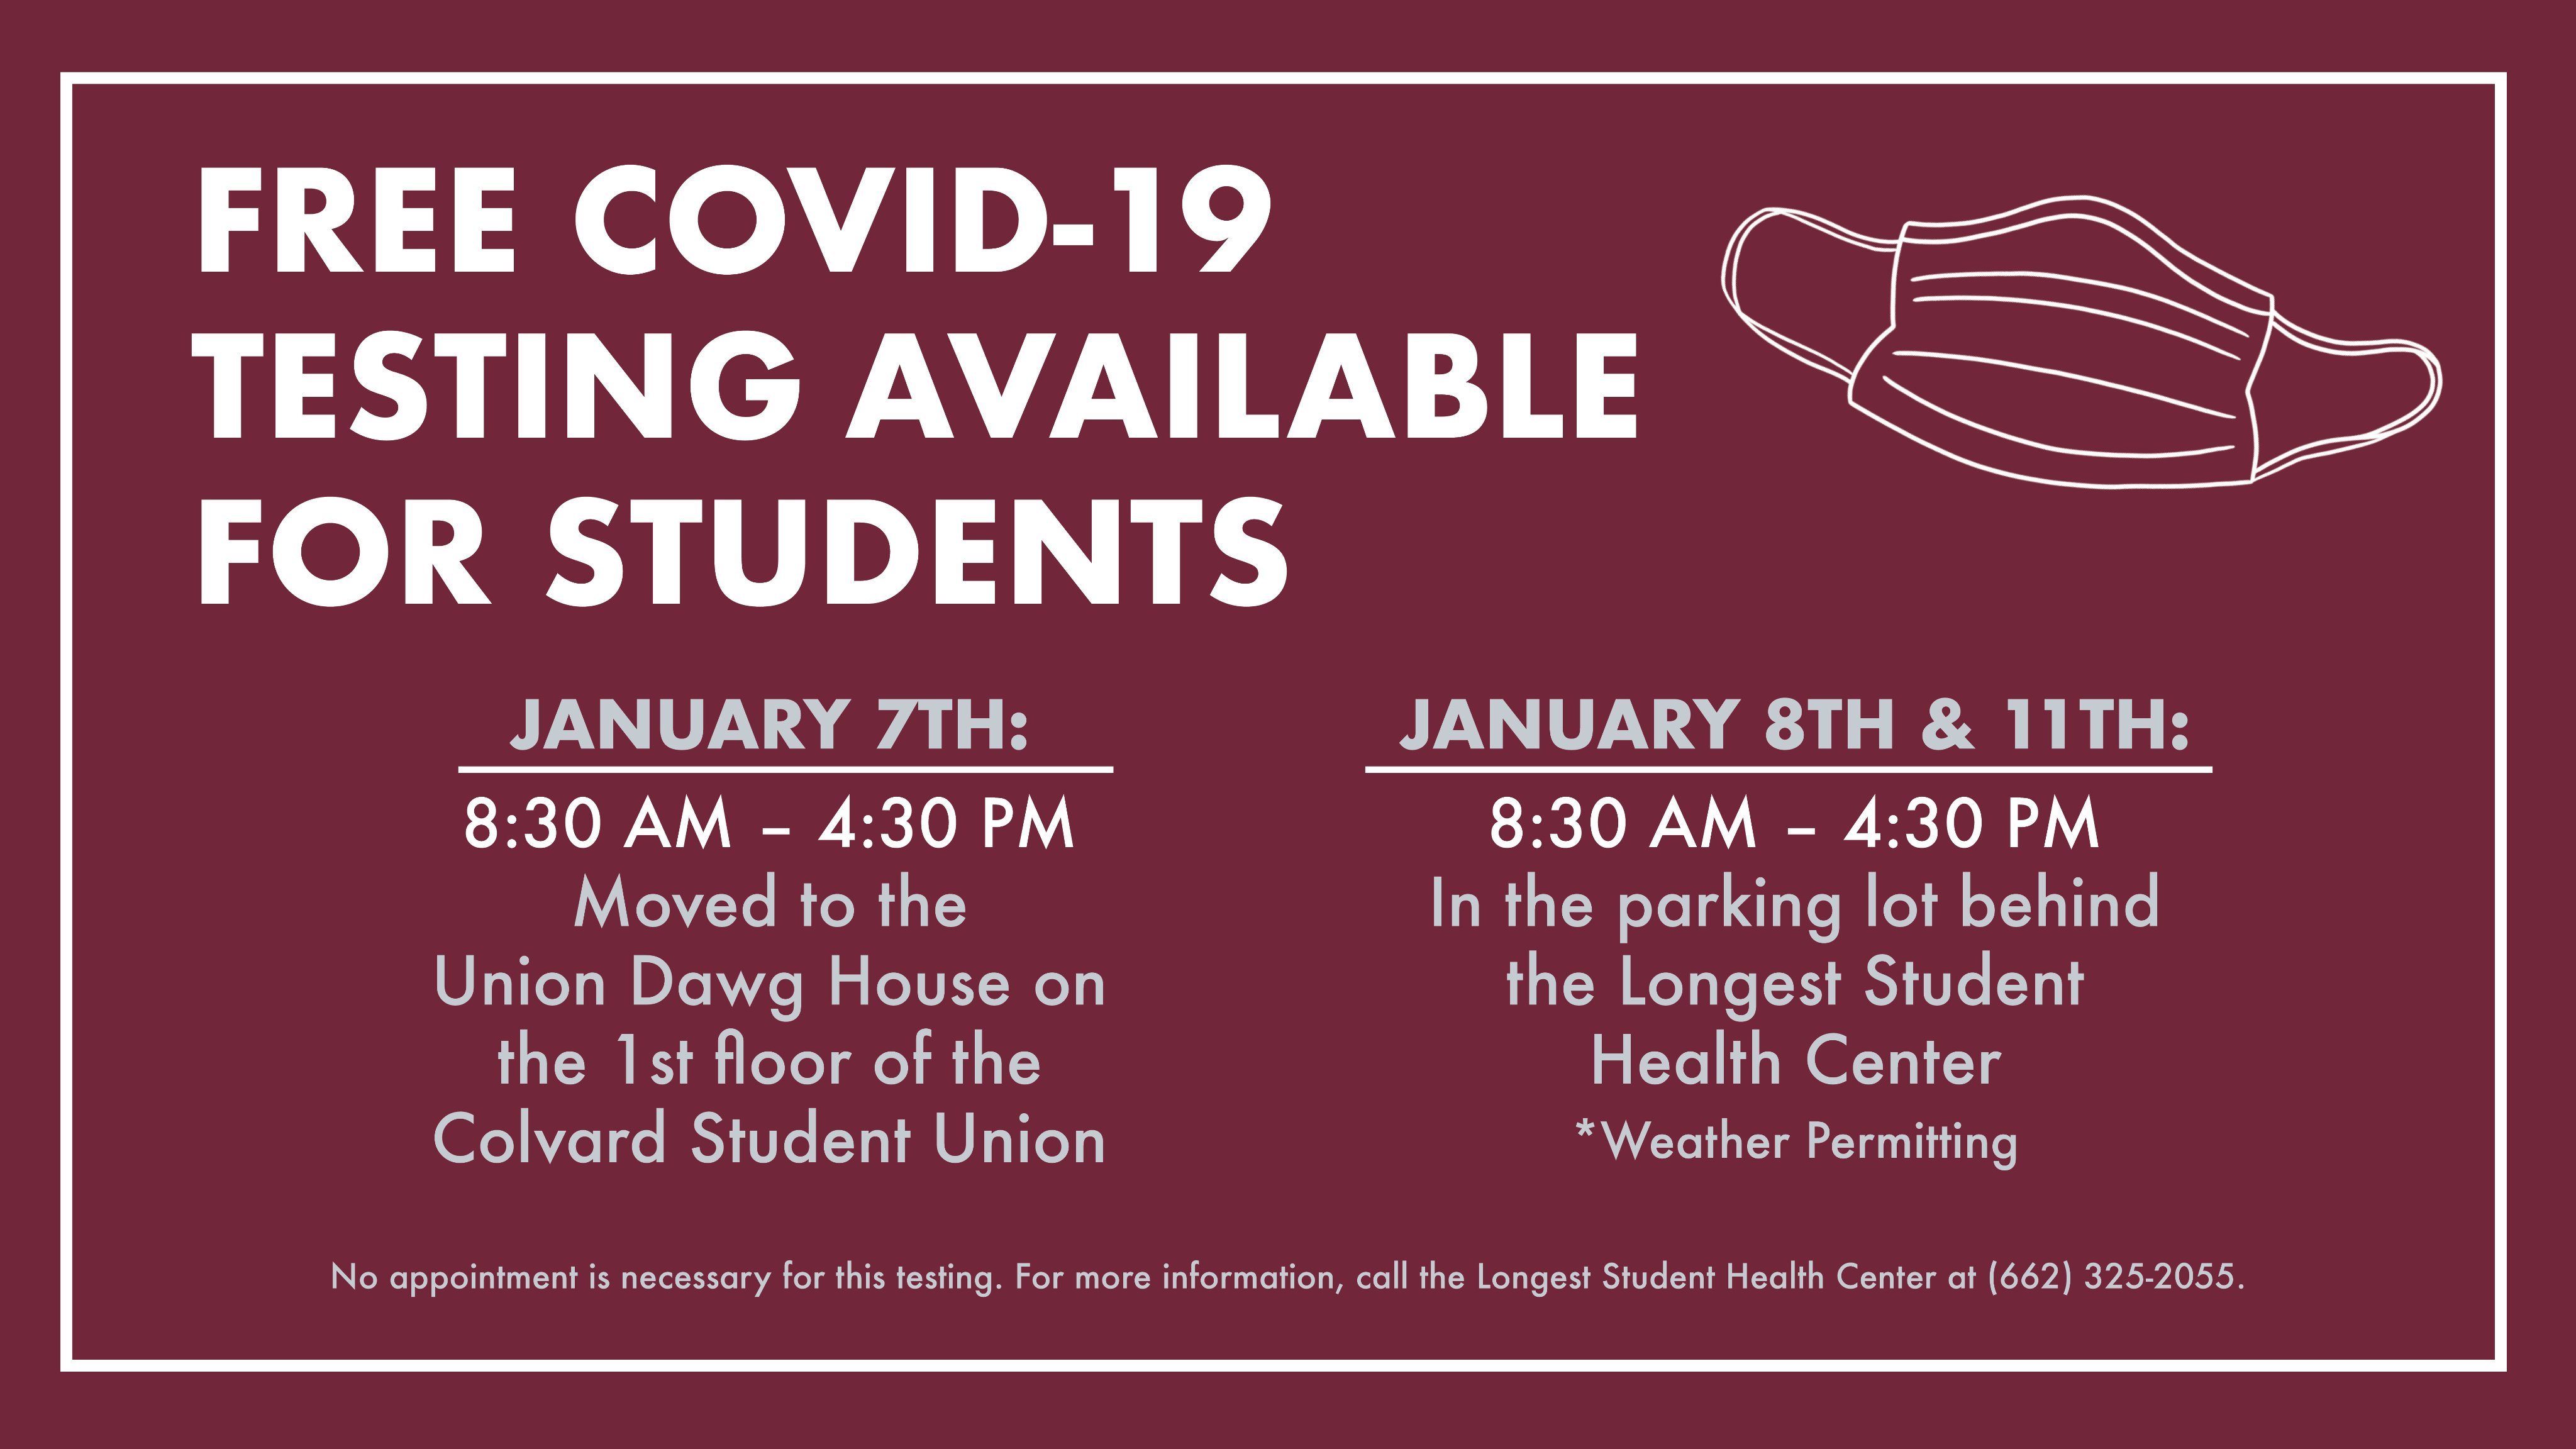 Maroon and white graphic with a photo of a face mask and dates and times for free COVID testing available to MSU students